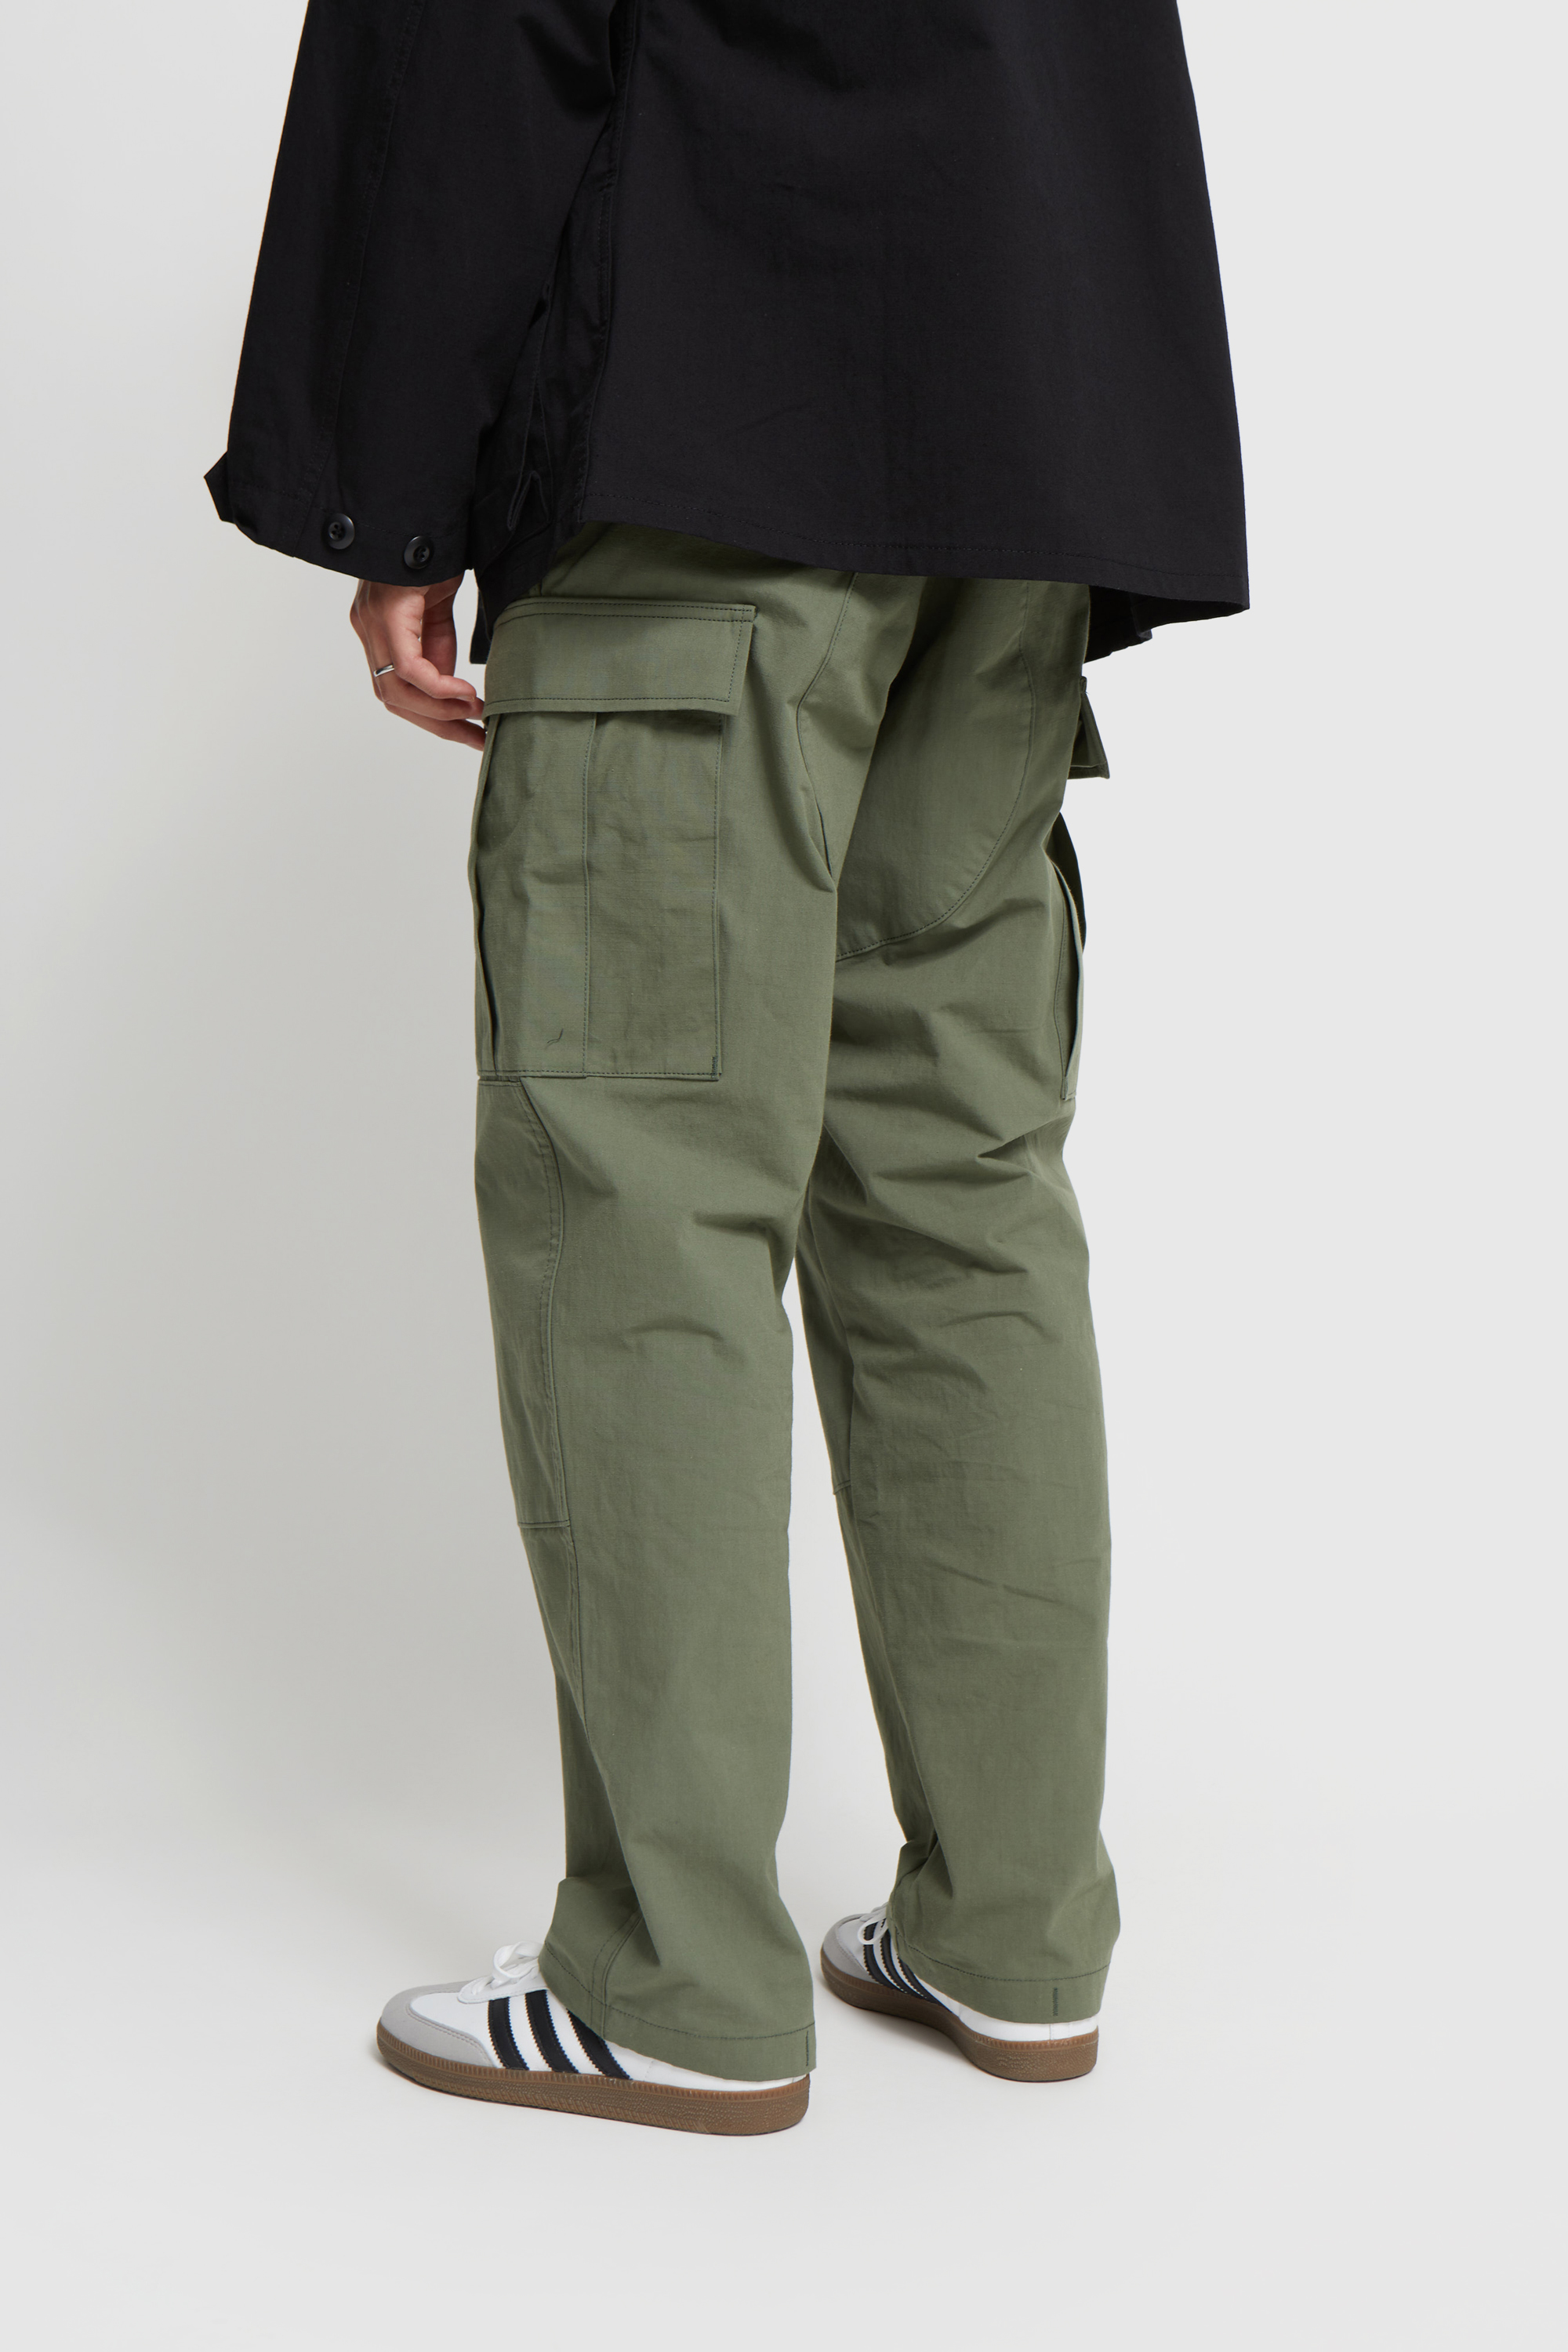 19AW WTAPS WMILL TROUSER 01 OD XL buds | www.kinderpartys.at